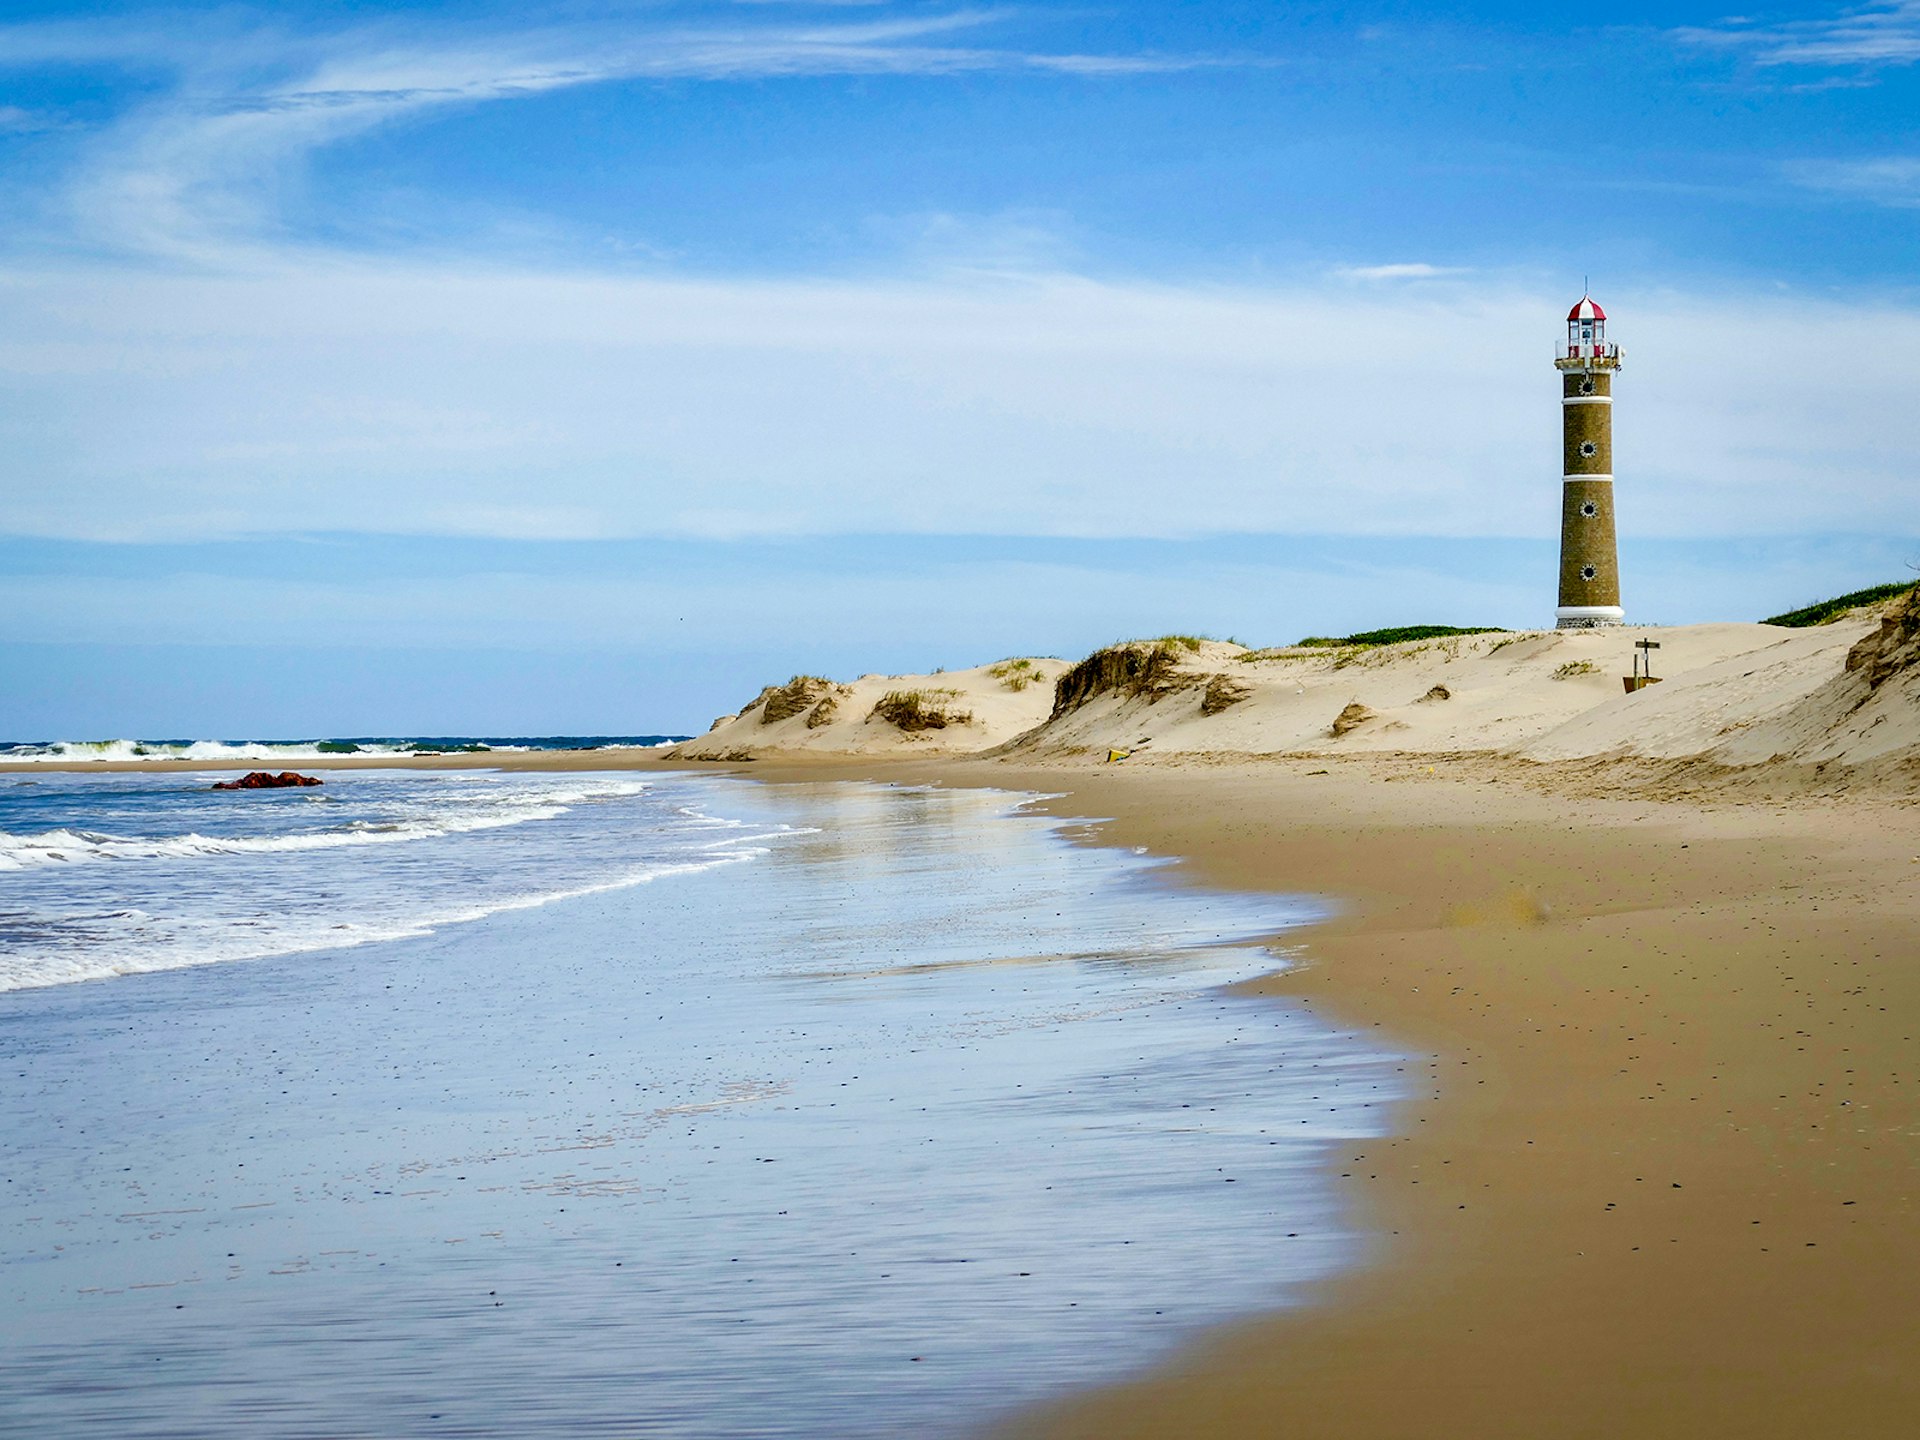 An empty beach with gold sand on a sunny day, with a lighthouse in the background on the right